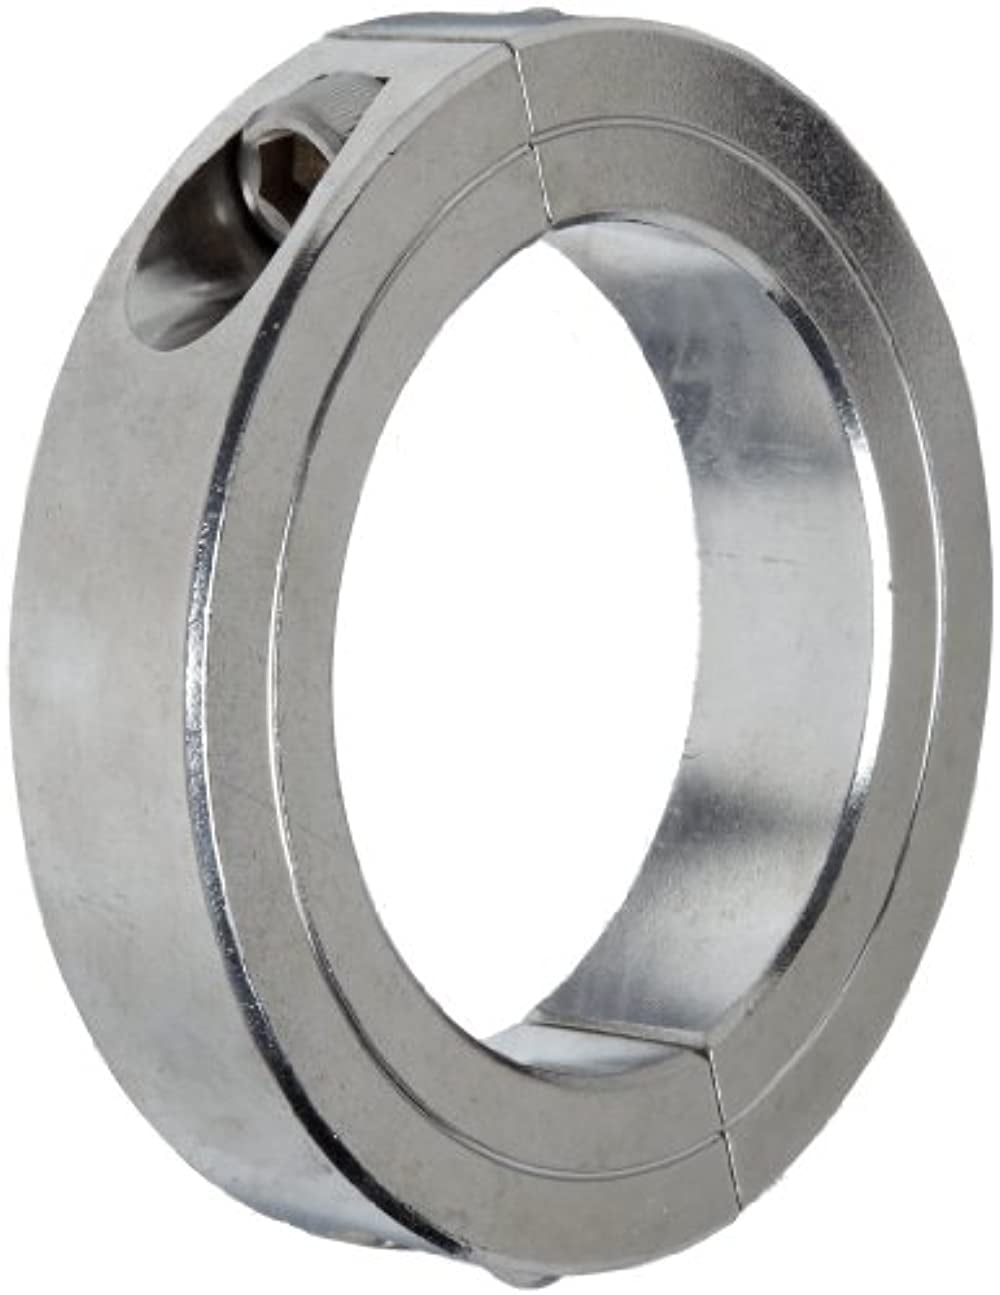 Climax Metal D2C-012-A Two-Piece Clamping Collar Double Wide 11/16 OD 5/8 Width Aluminum 1/8 Bore